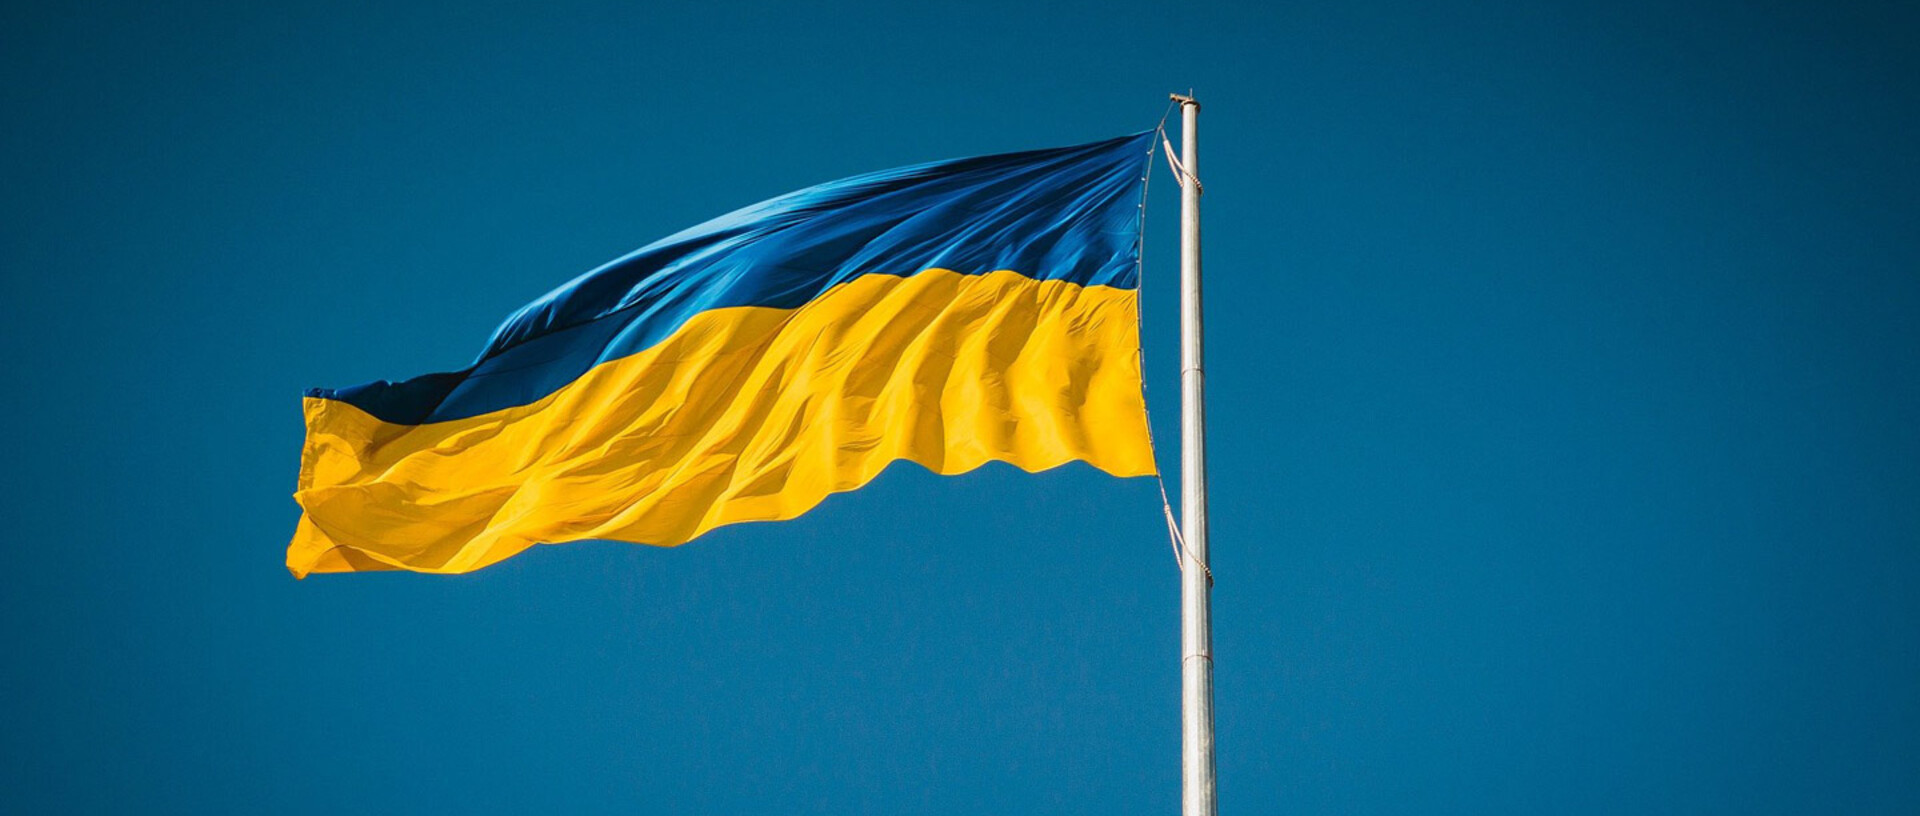 The OeAW shows solidarity with Ukraine